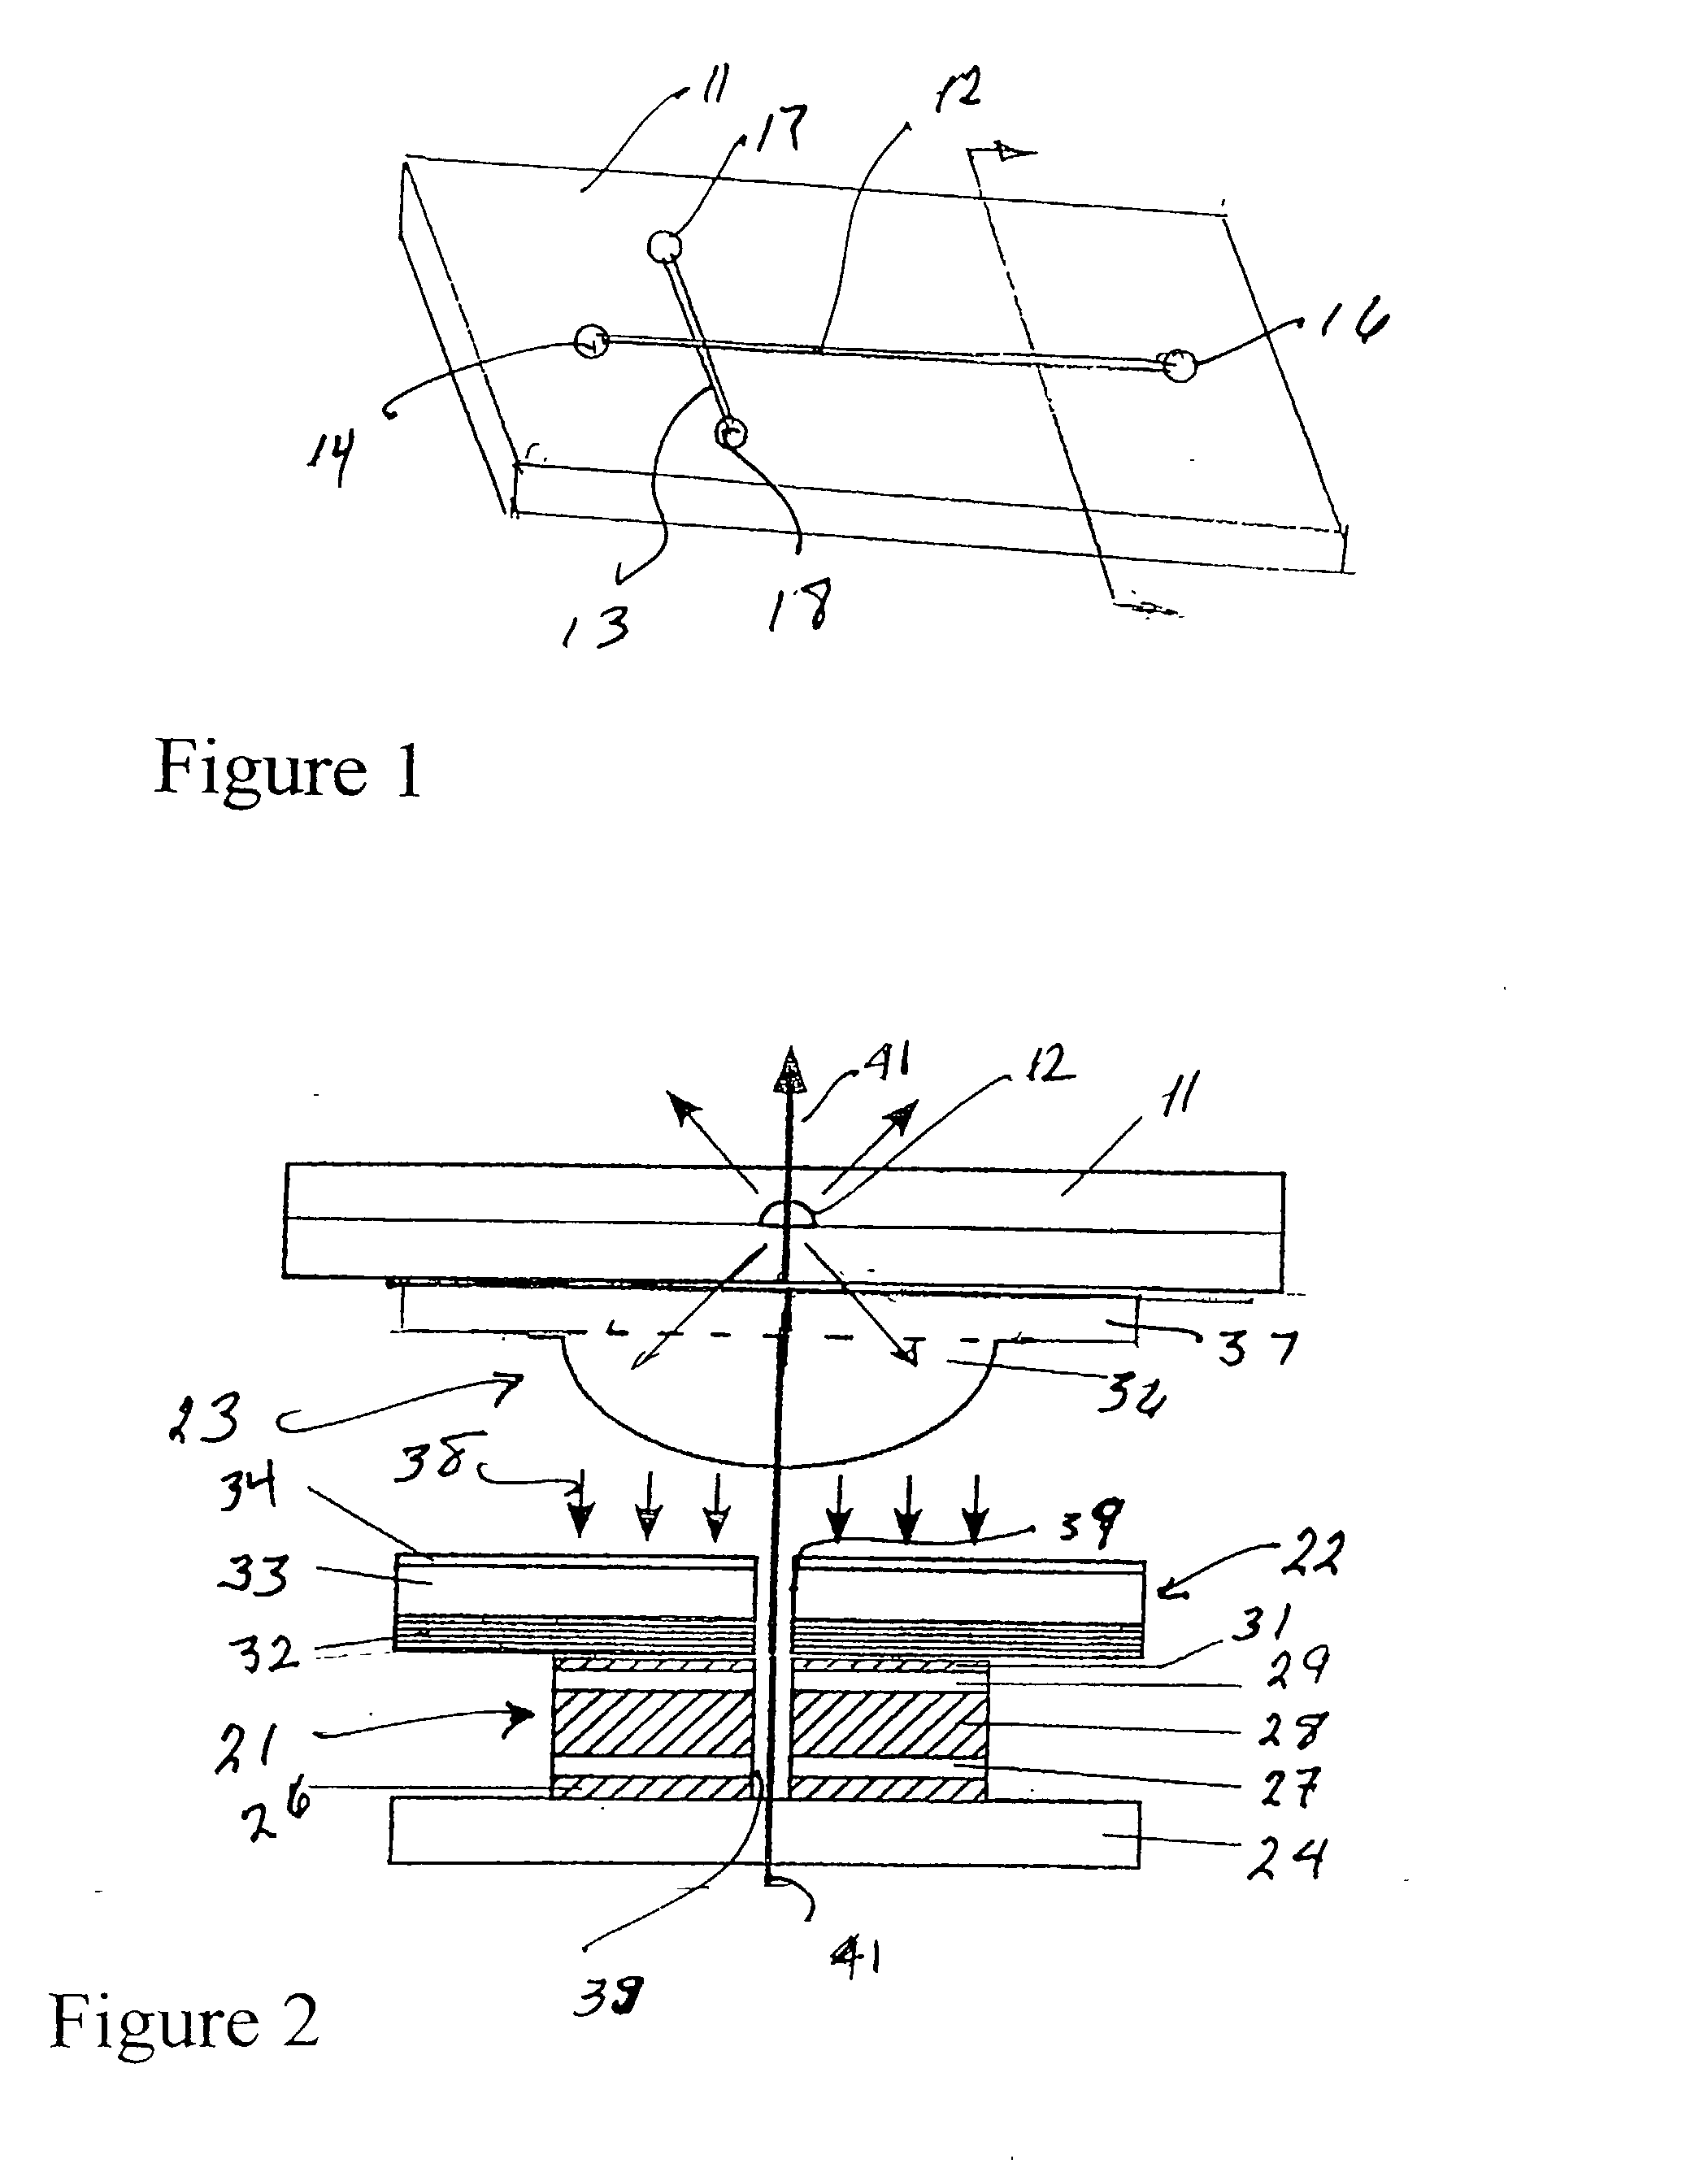 Solid-state detector and optical system for microchip analyzers